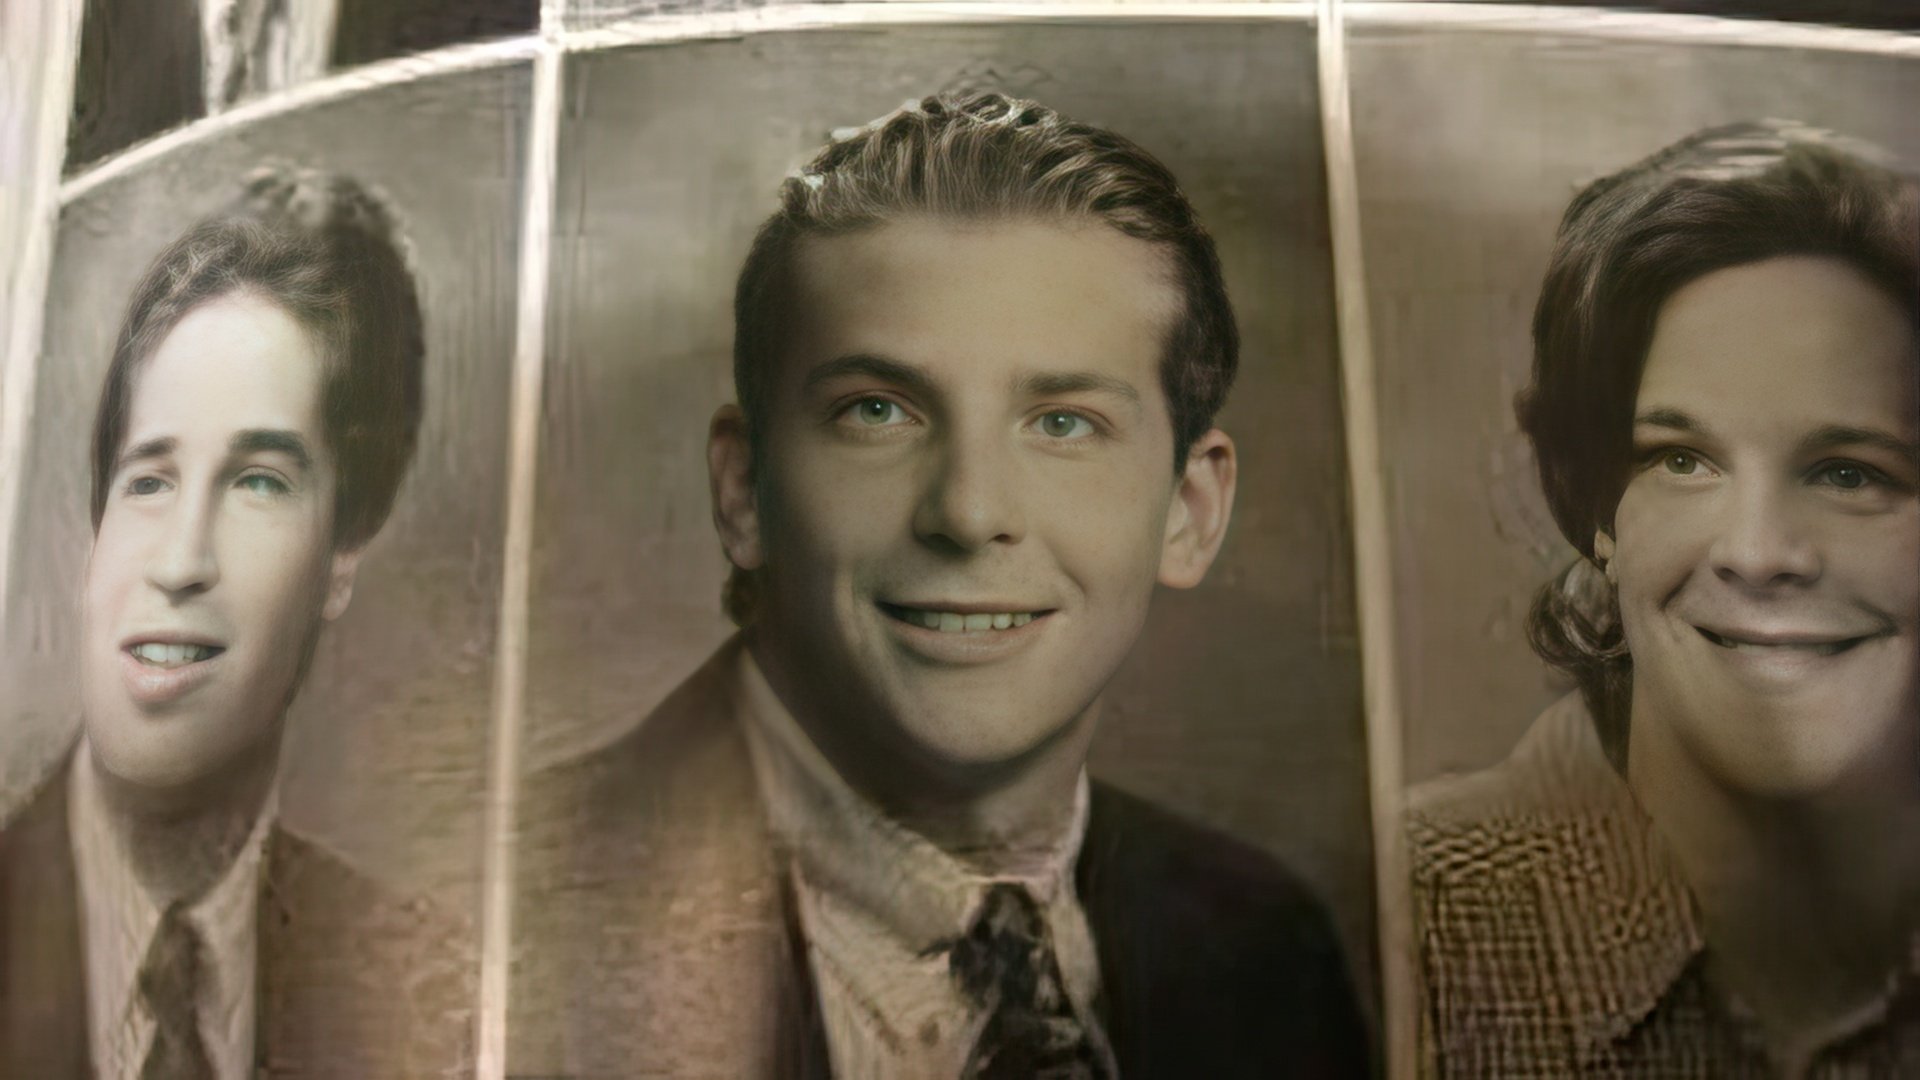 Young Bradley Cooper (photo from the actor's school yearbook)